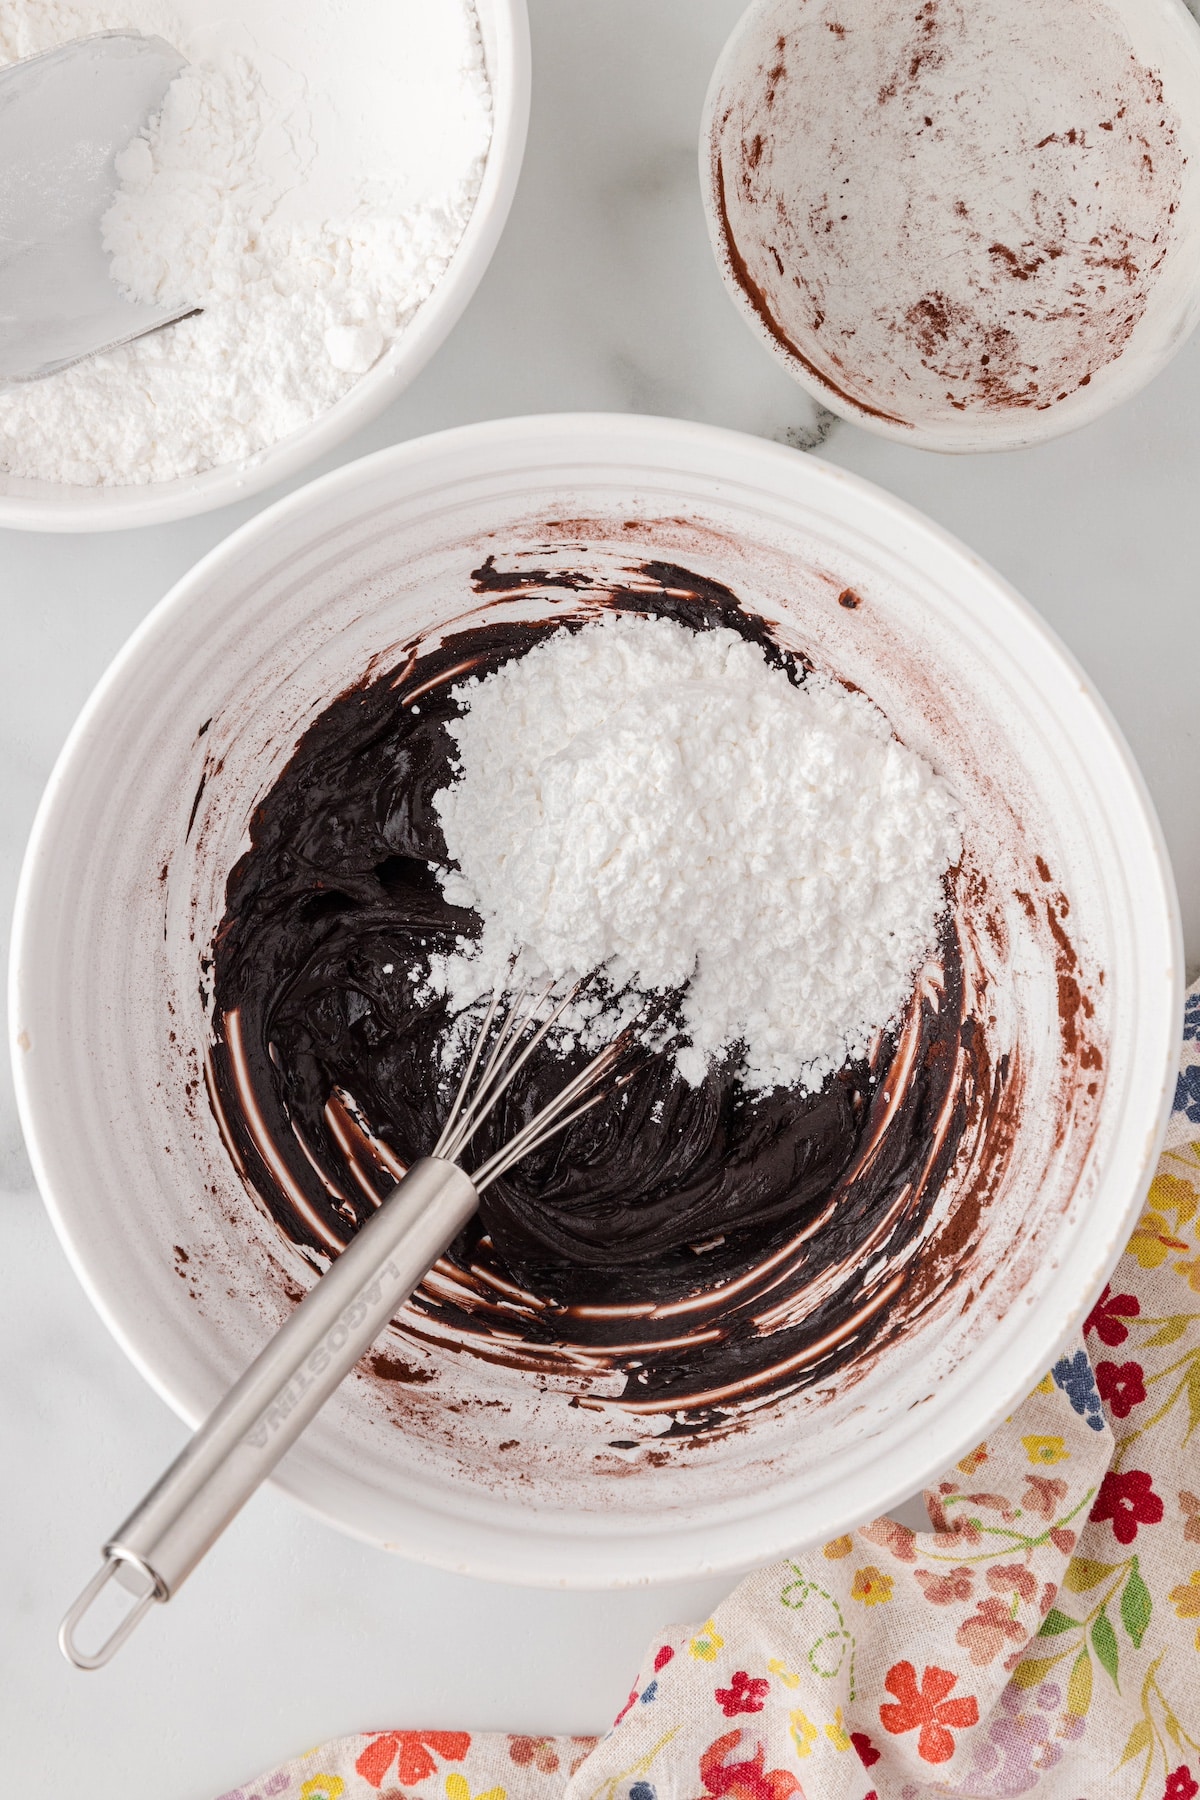 add powdered sugar to the chocolate frosting